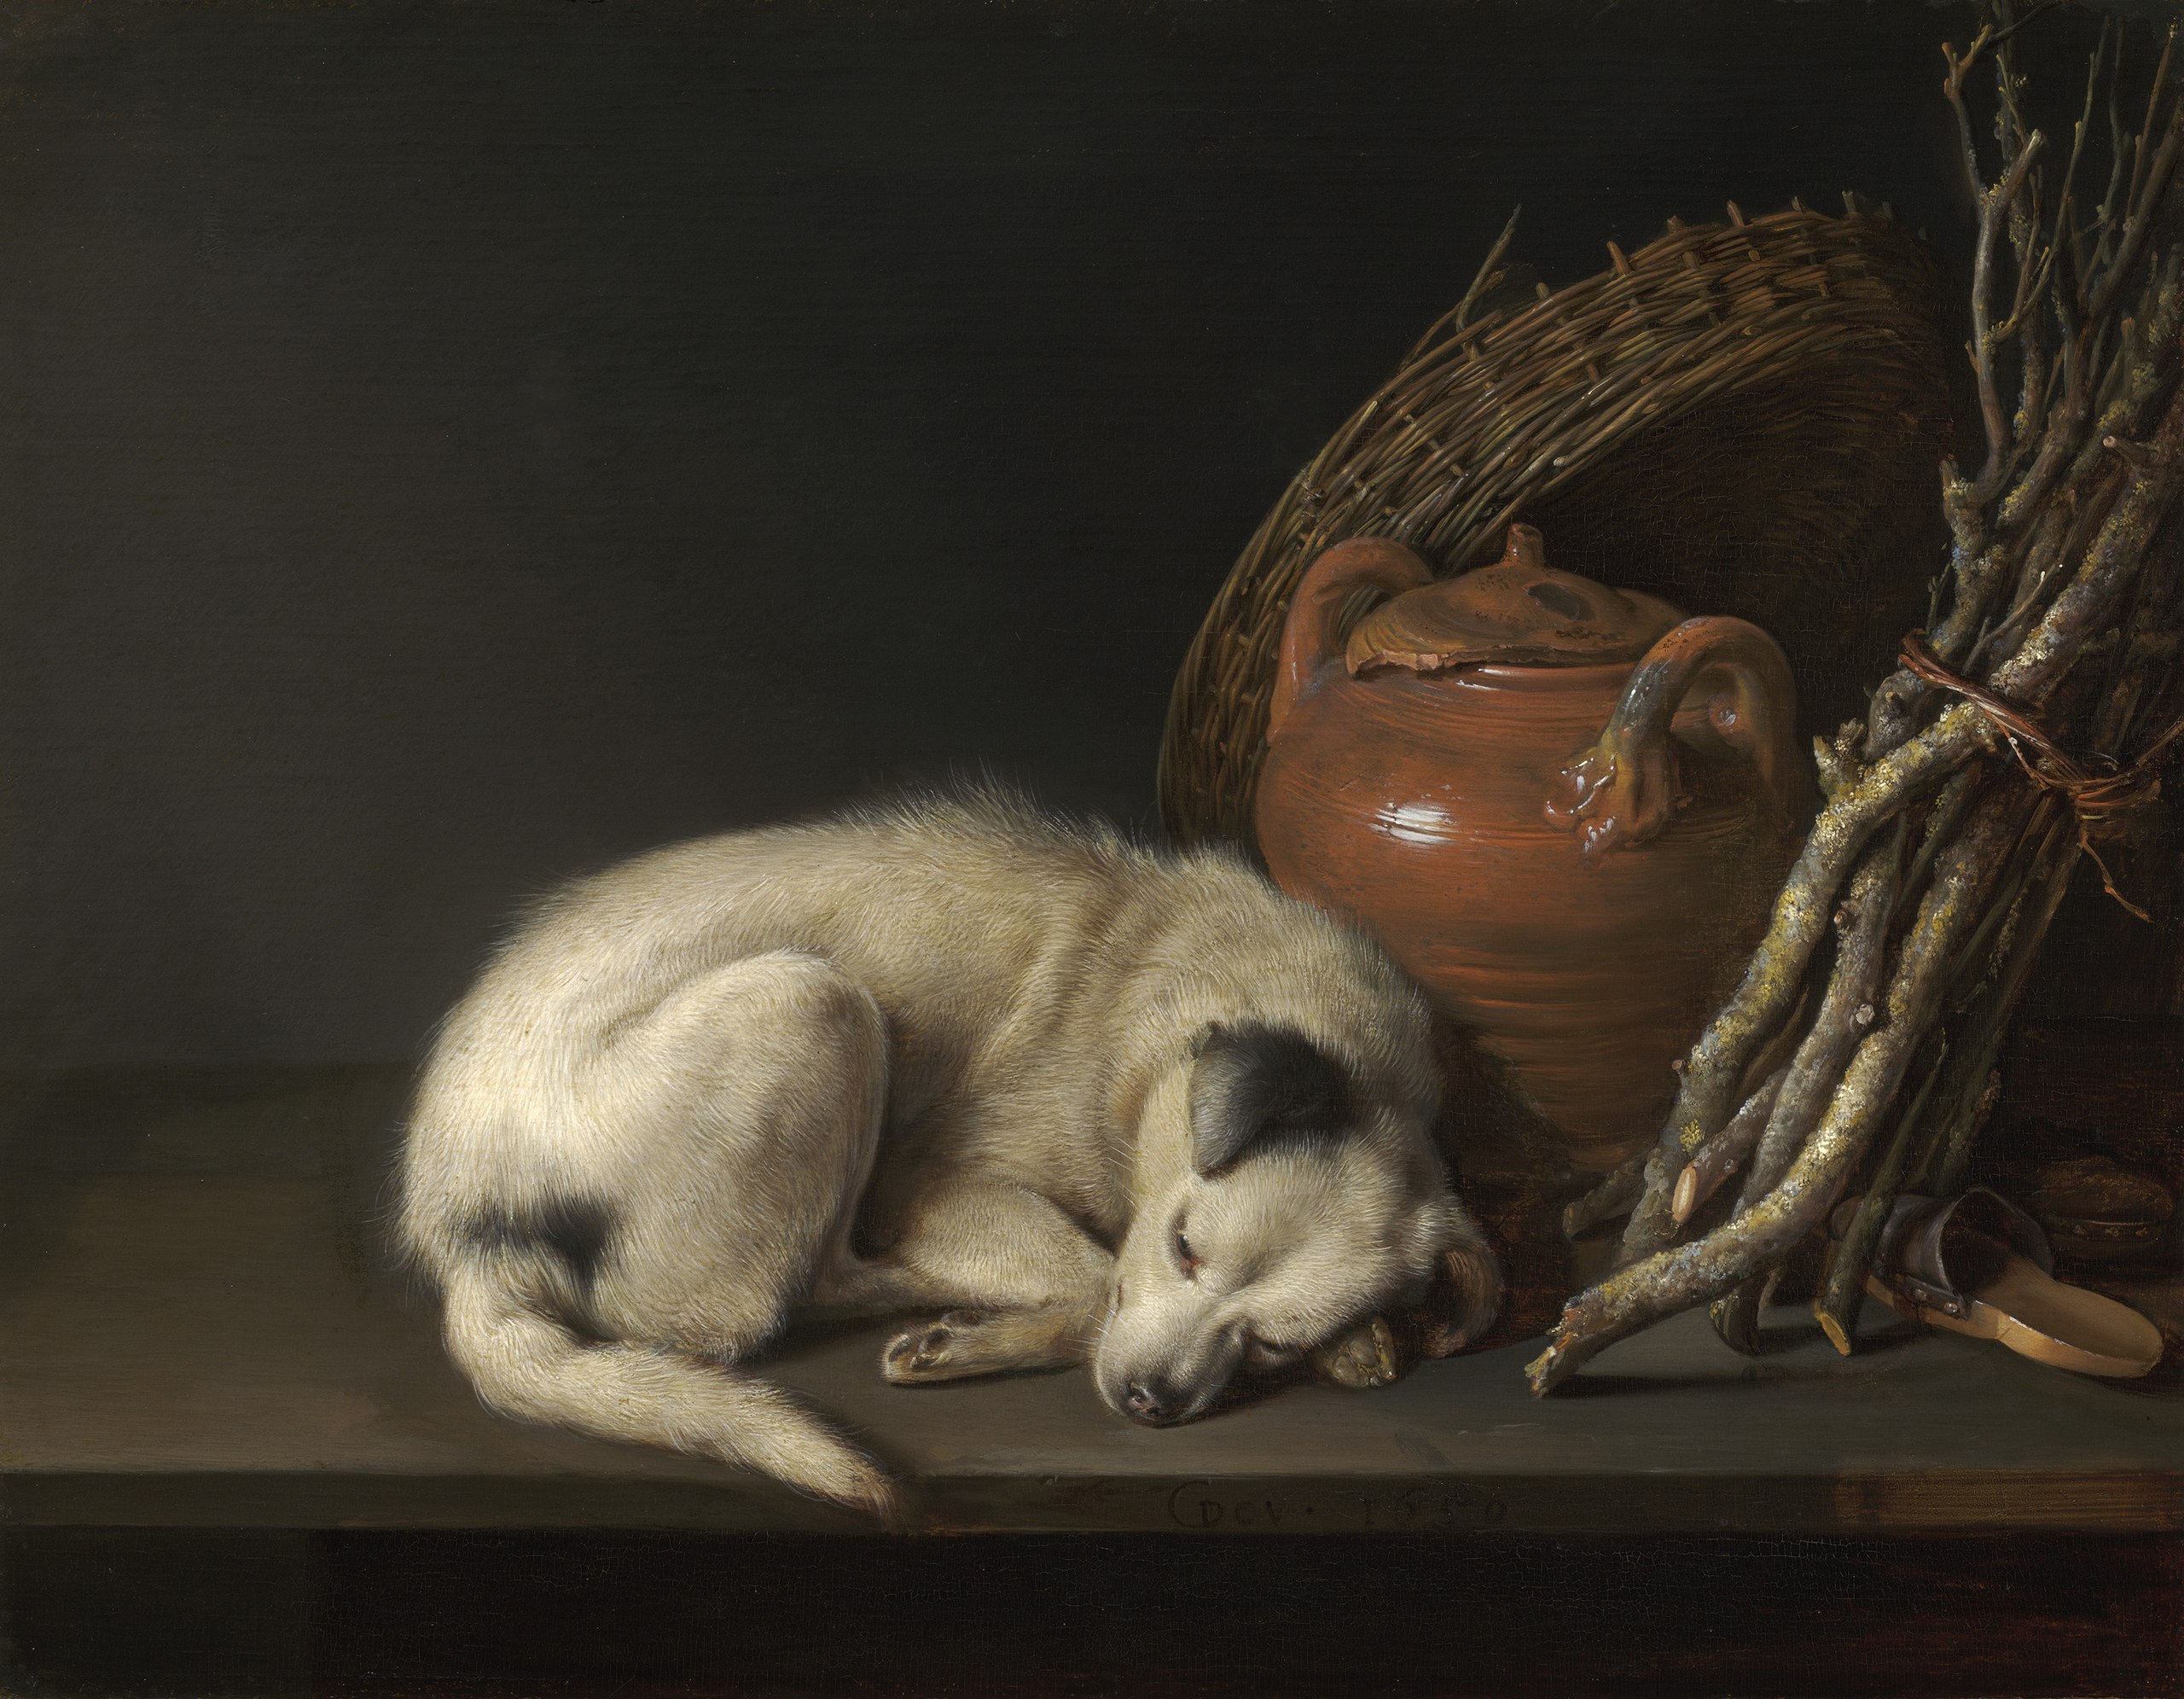 Dog at Rest by Gerrit Dou - 1650 - 16.5 x 21.6 cm Museum of Fine Arts Boston